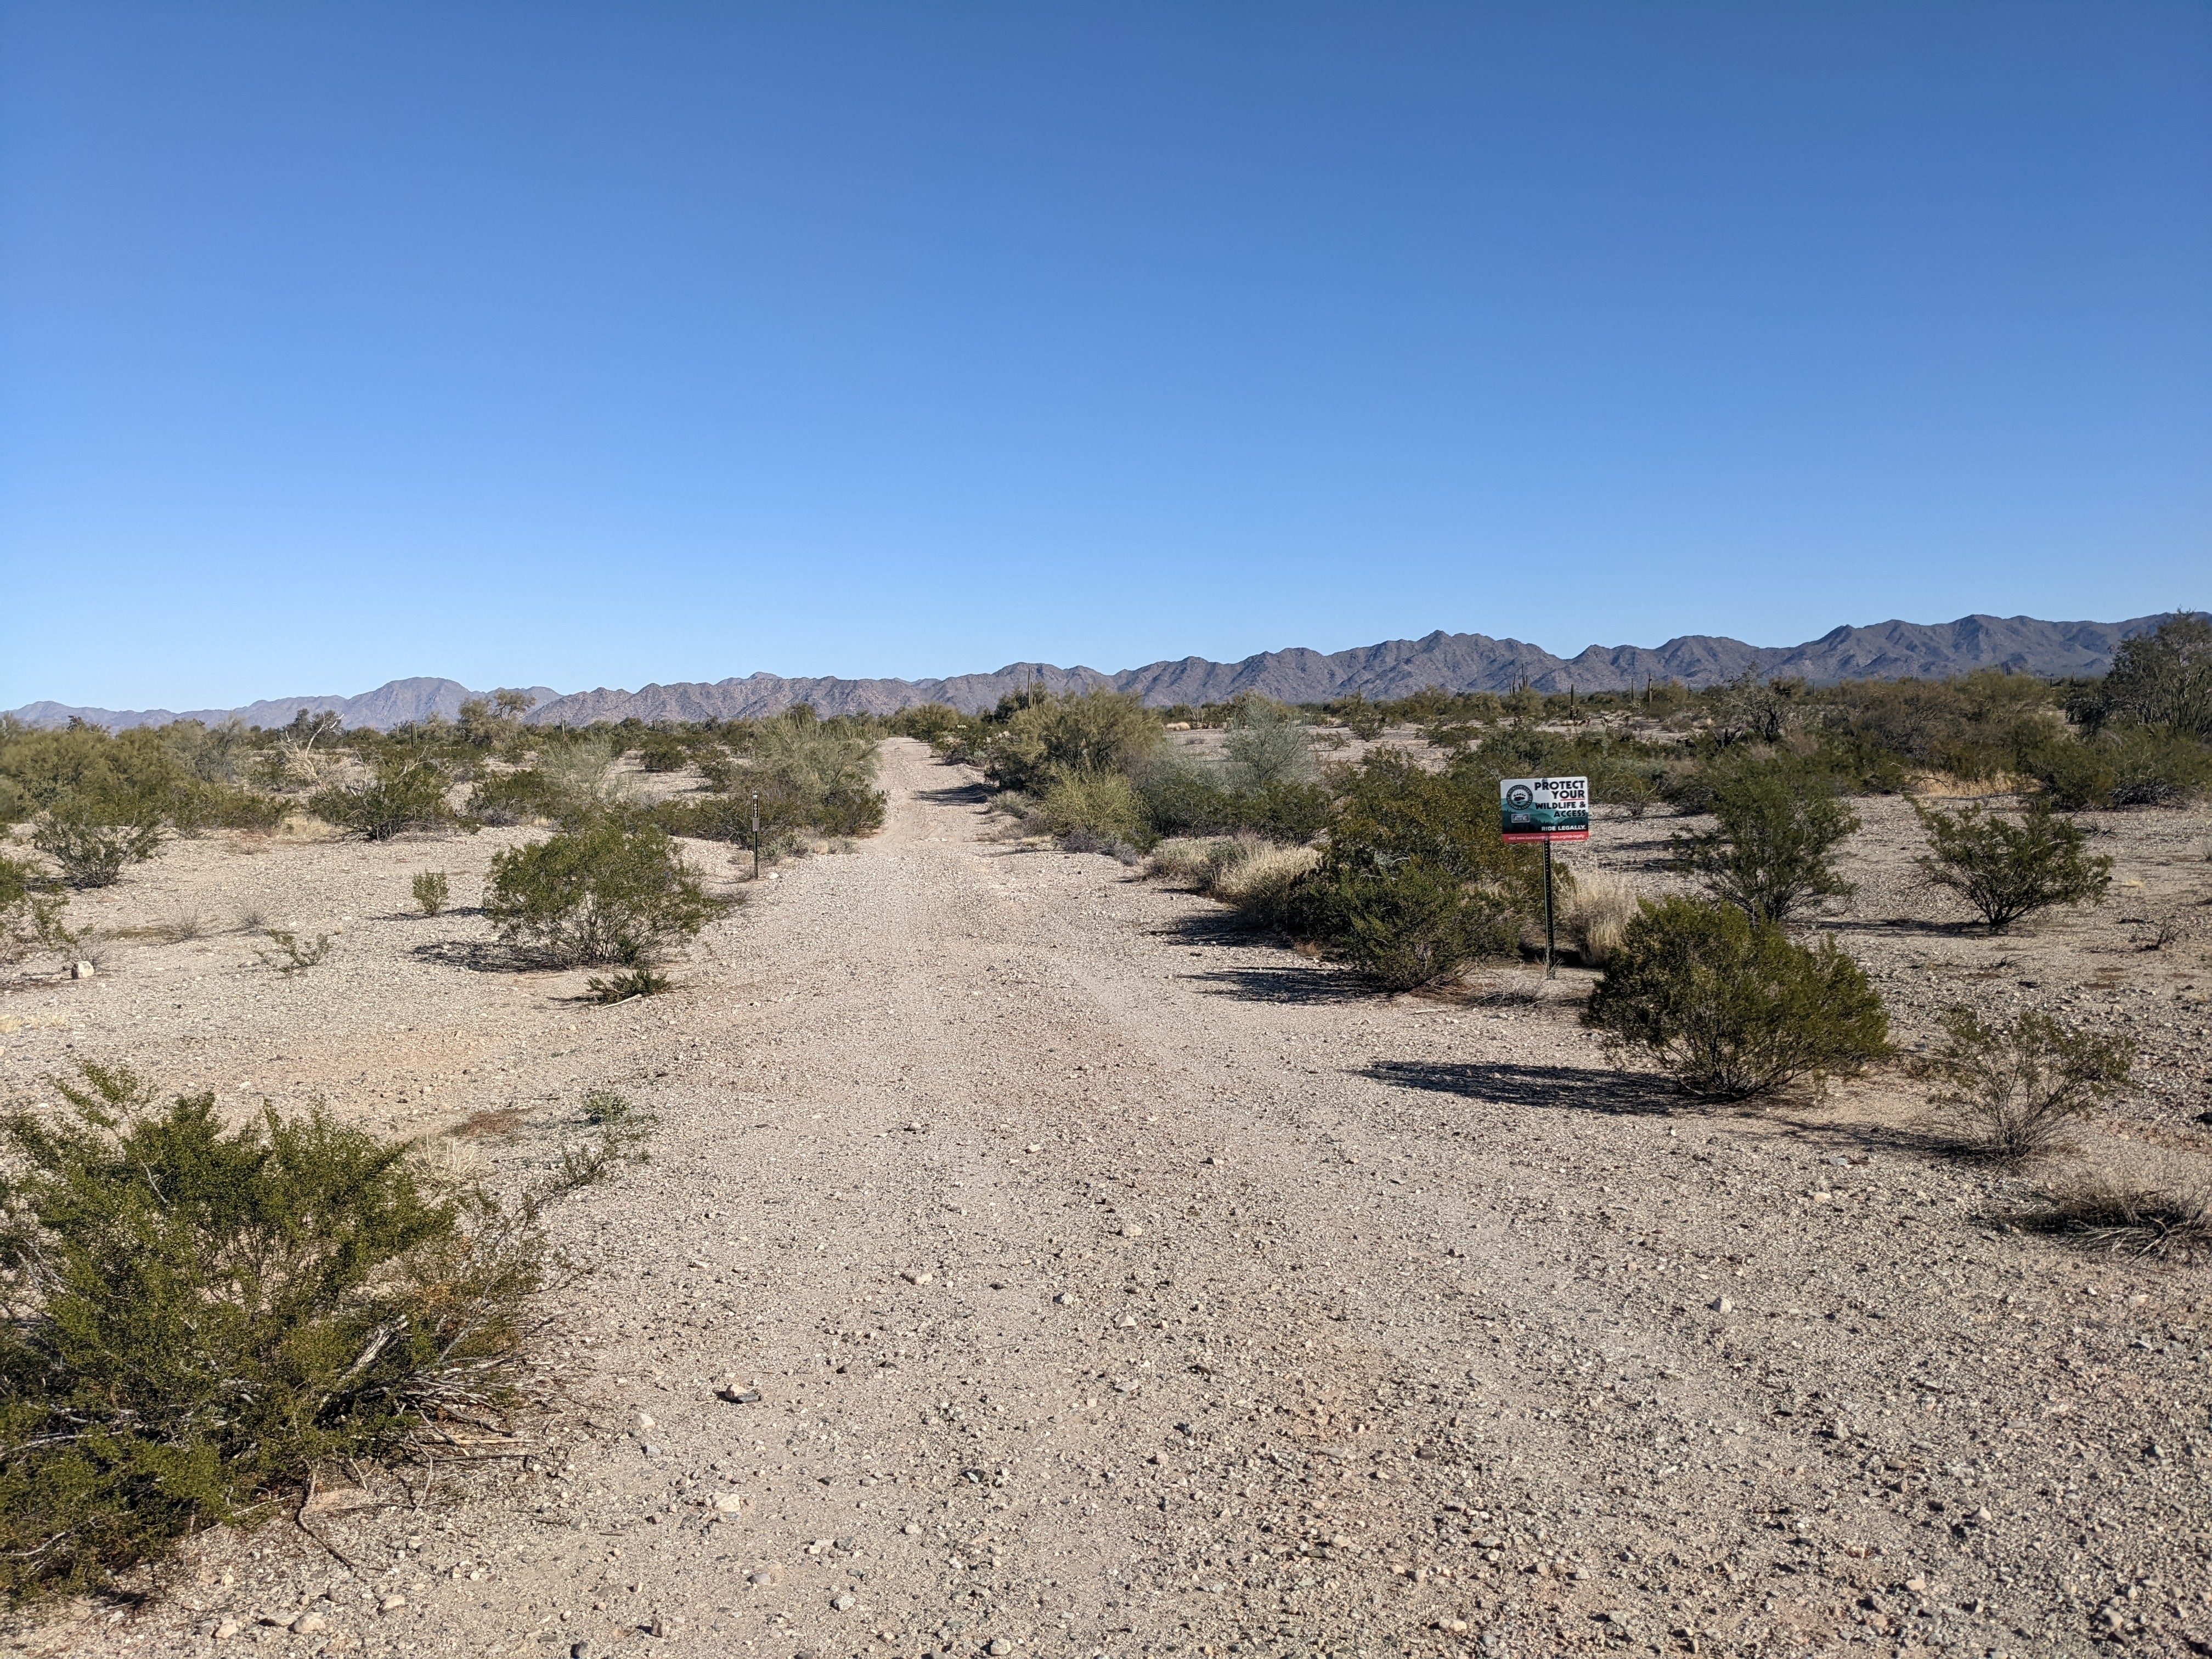 Camper submitted image from BLM Sonoran Desert National Monument - BLM road #8032 access - 3